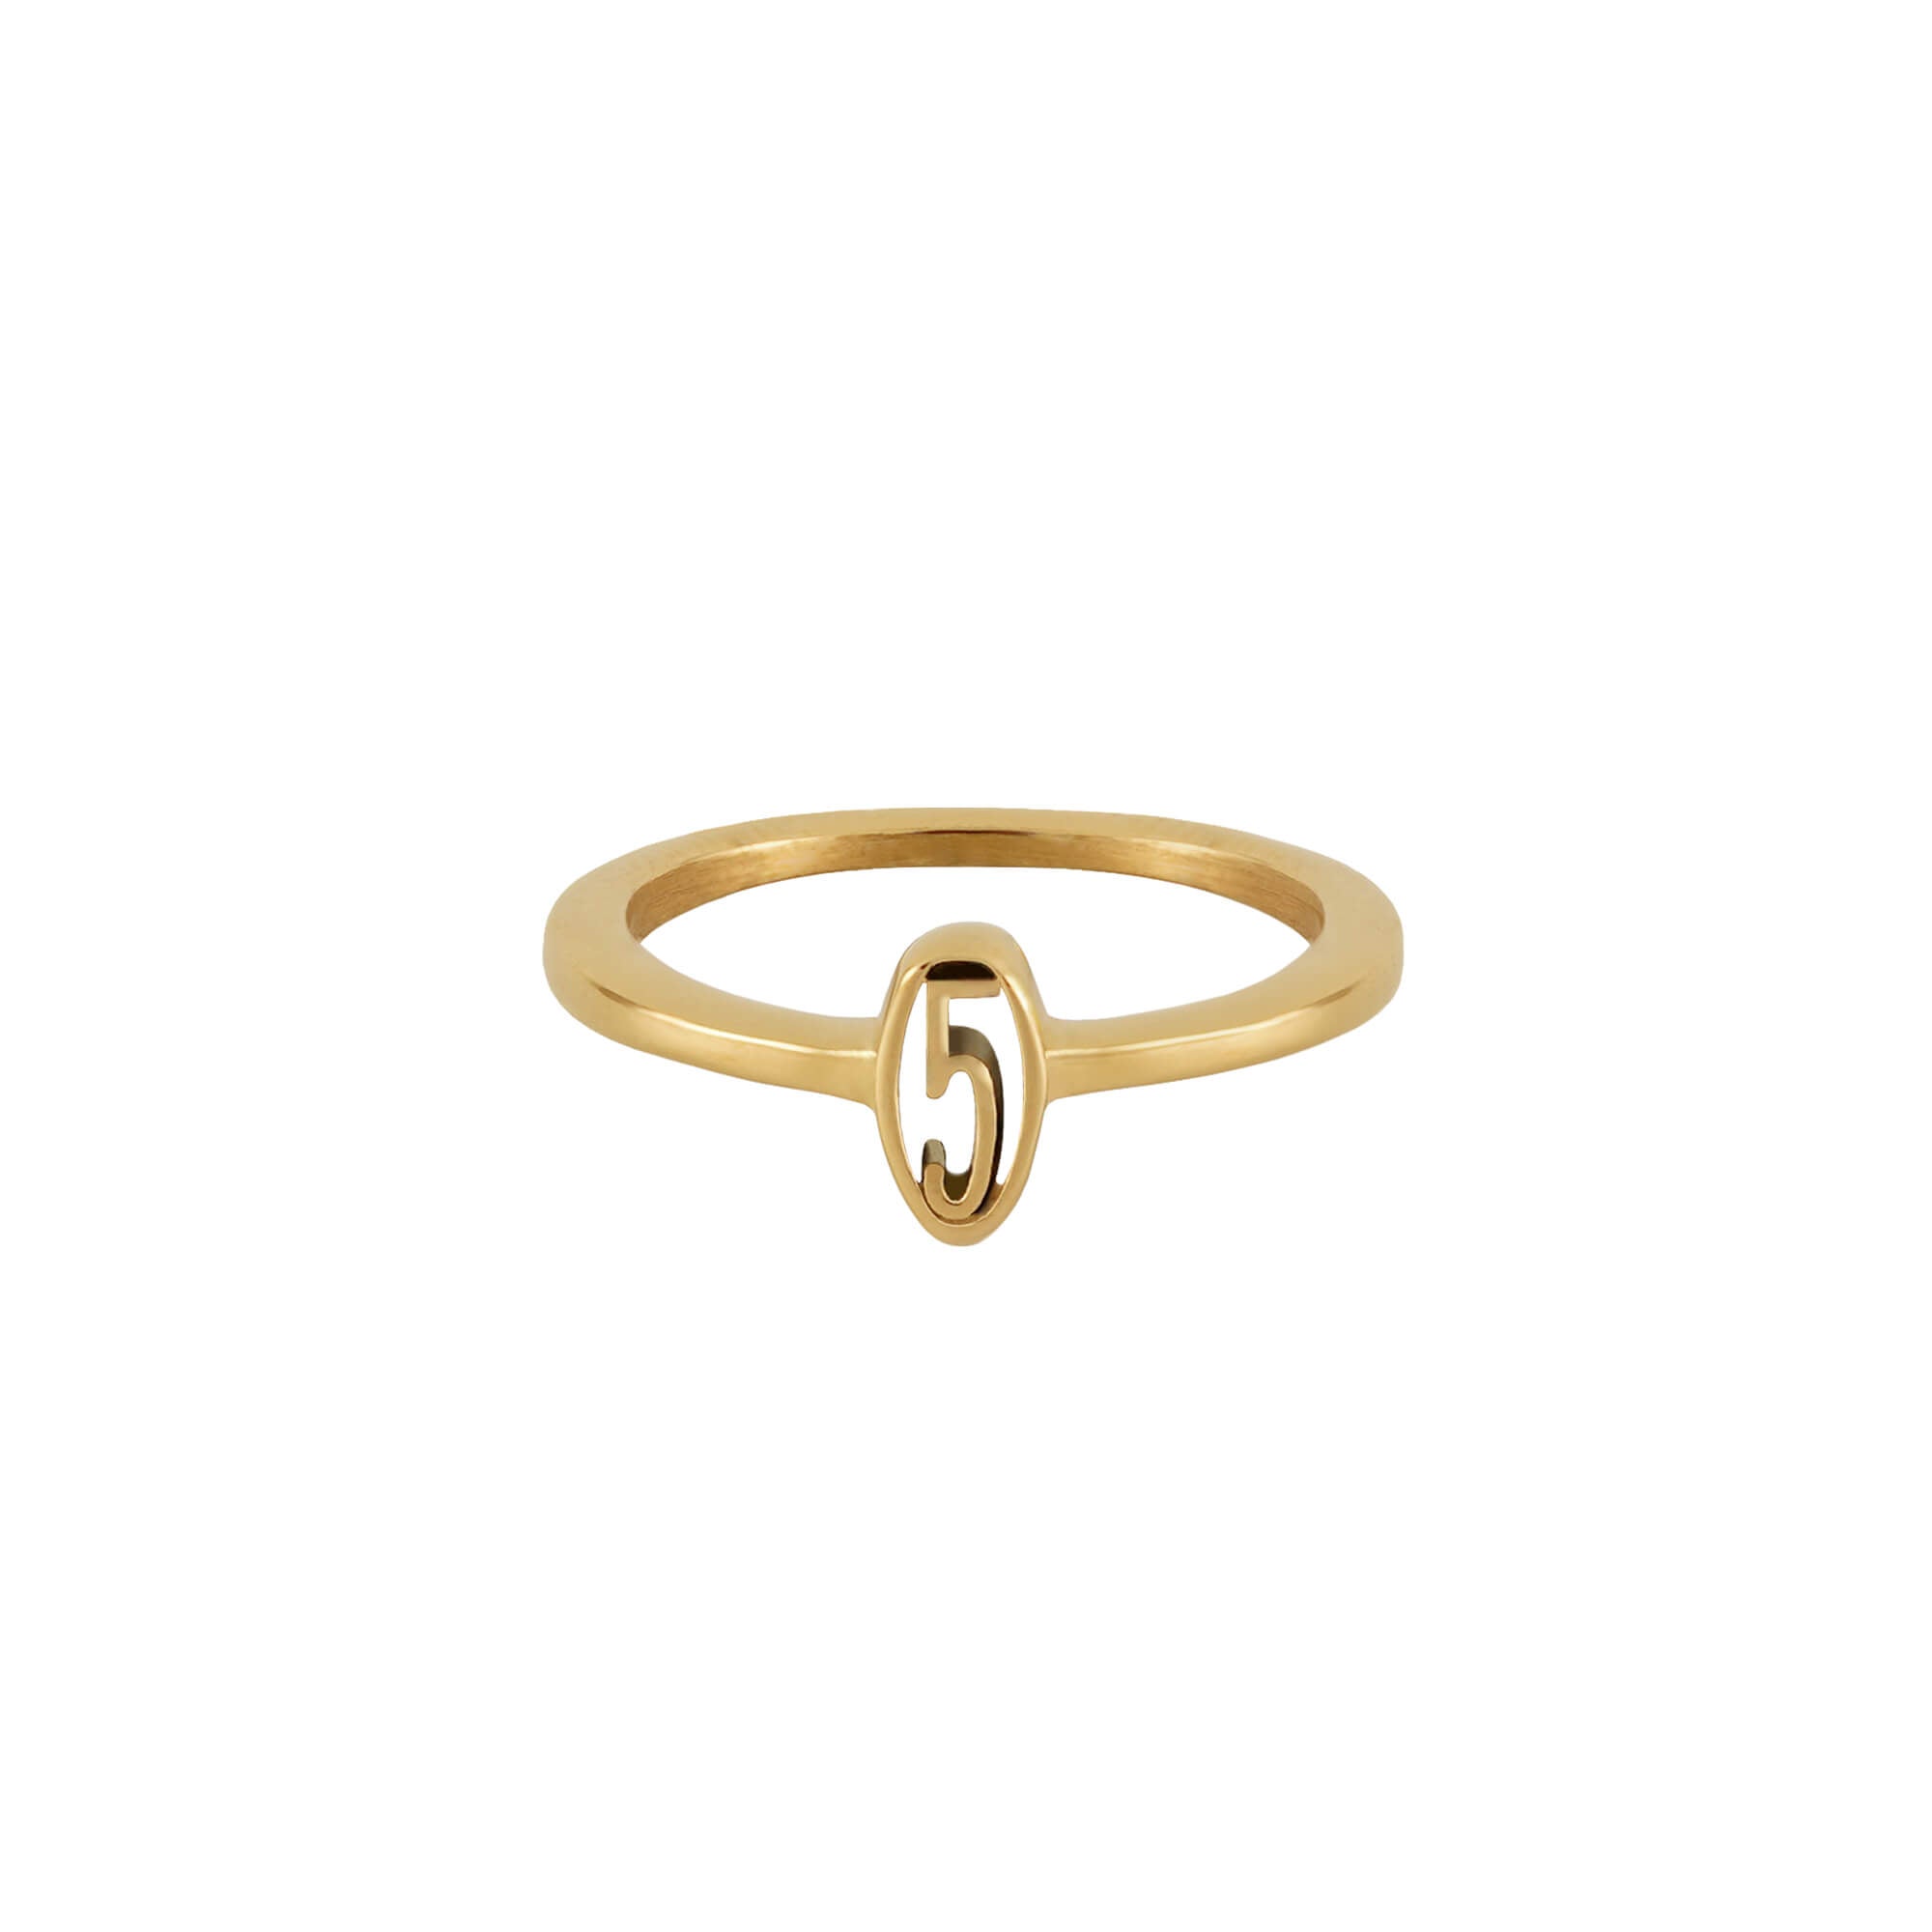 LUCKY5 men's ring by Five Jwlry. A ring that stands out for its simplicity and unique design, featuring the number 5 incorporated into the band. Available in 14k gold or silver, crafted from water-resistant 316L stainless steel. Hypoallergenic with a 2-year warranty.